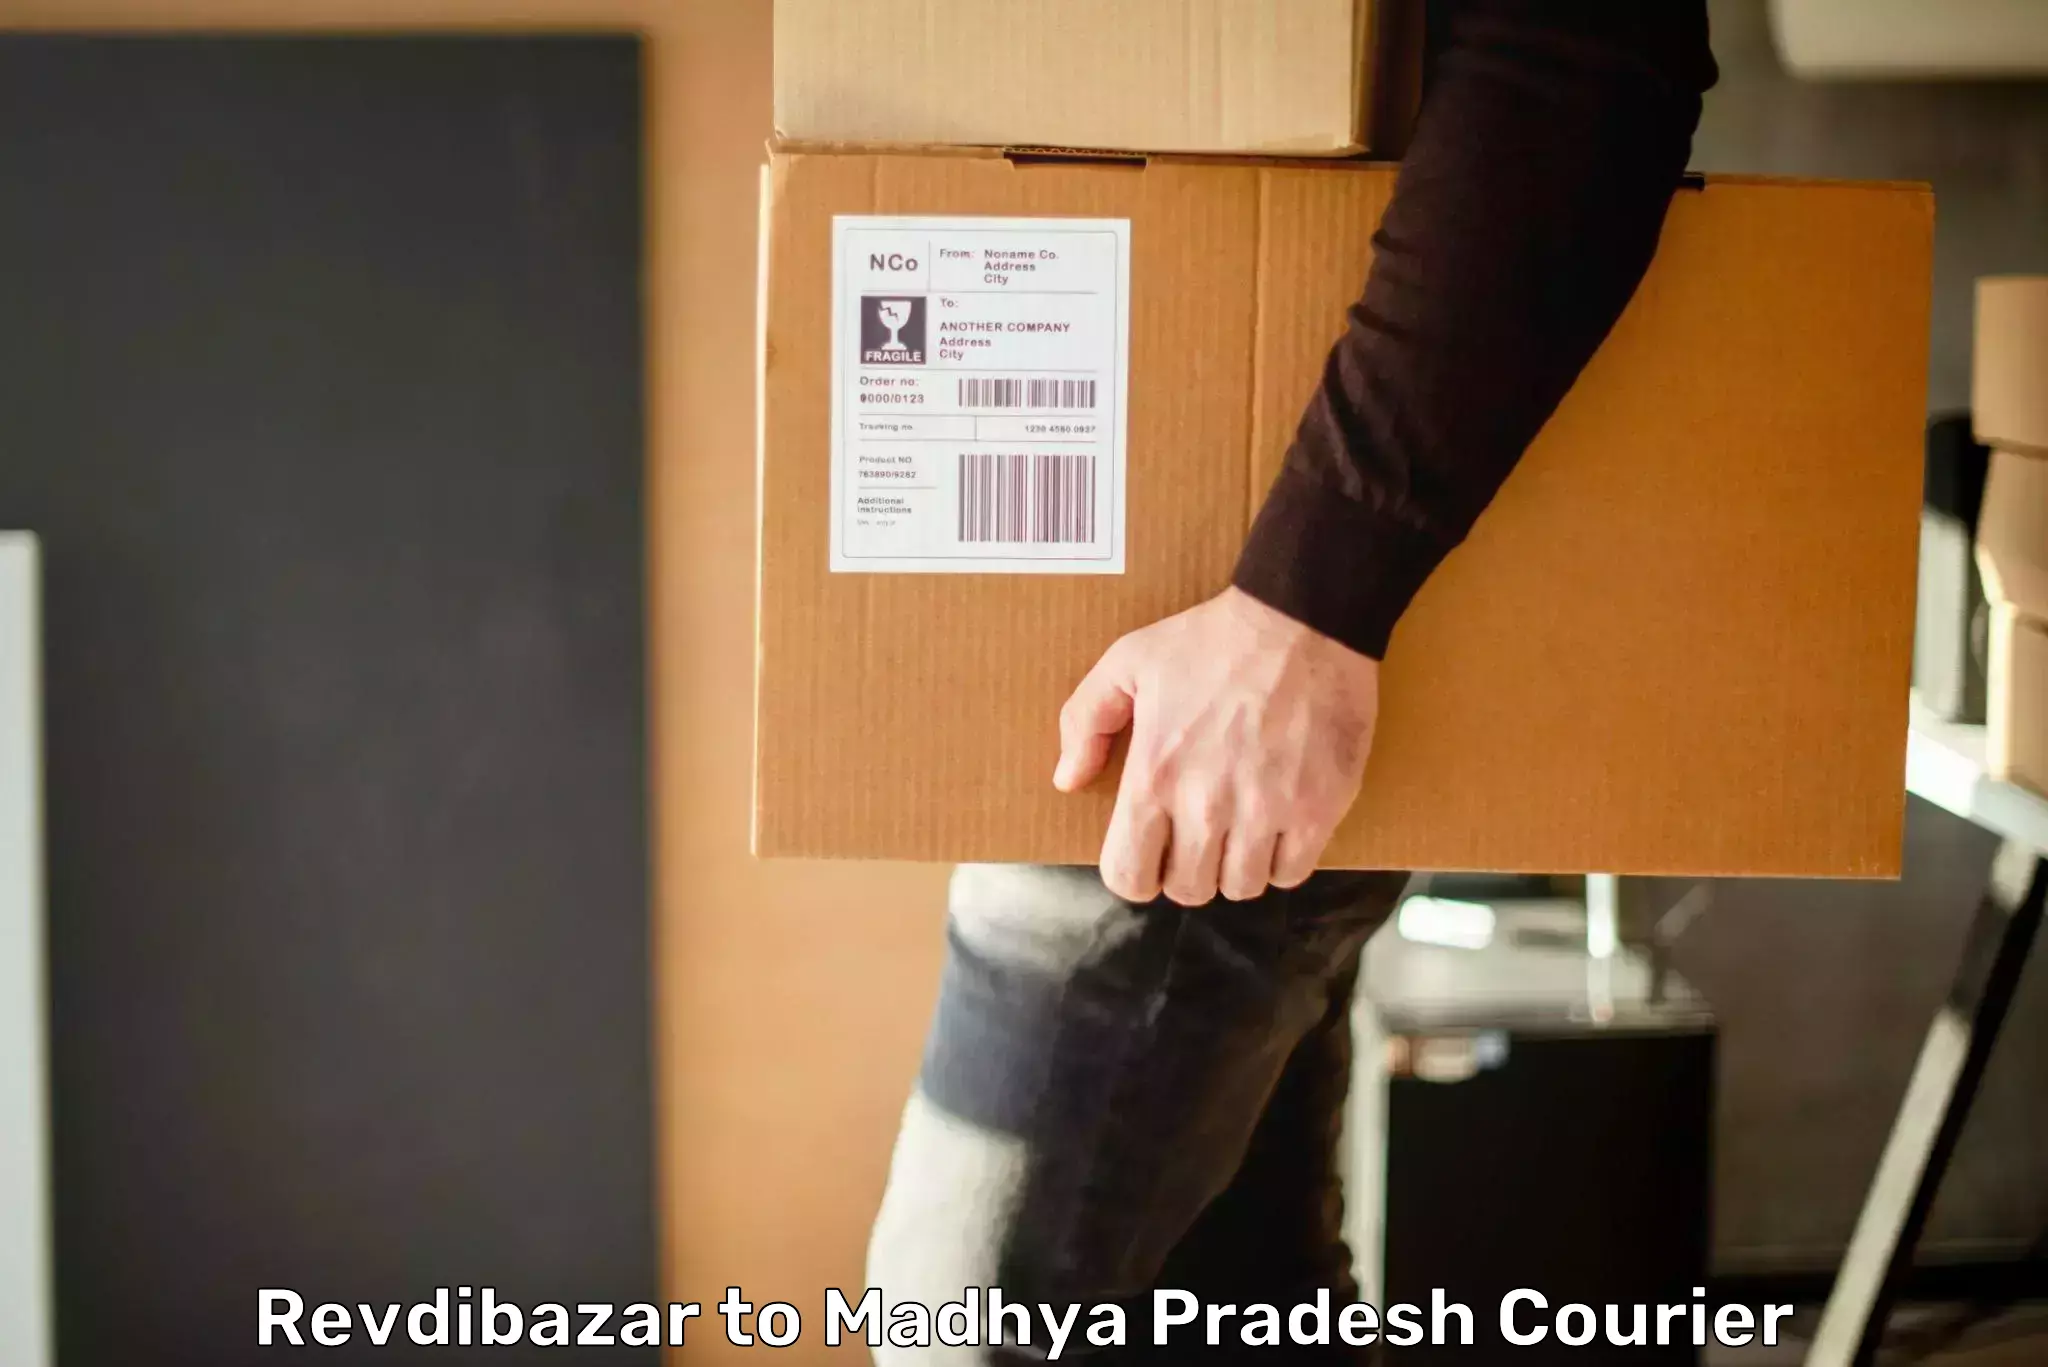 Professional courier services in Revdibazar to Rampur Naikin